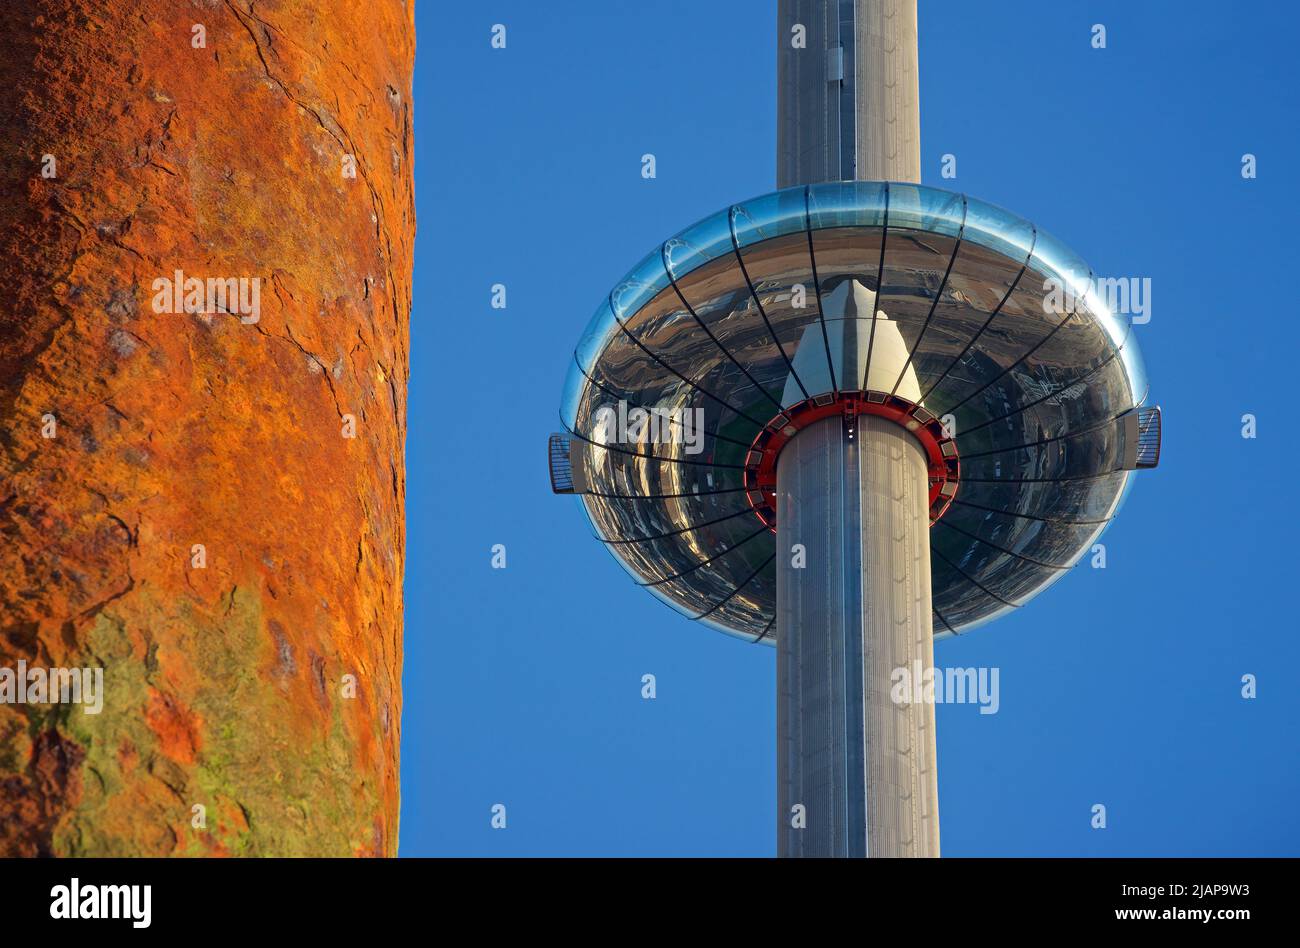 The i360 pod rising up its supporting tower, Brighton. Structural pylon from the now derelict West Pier to one side. Brighton & Hove, England, East Sussex, England. Old and new juxtaposition. Stock Photo